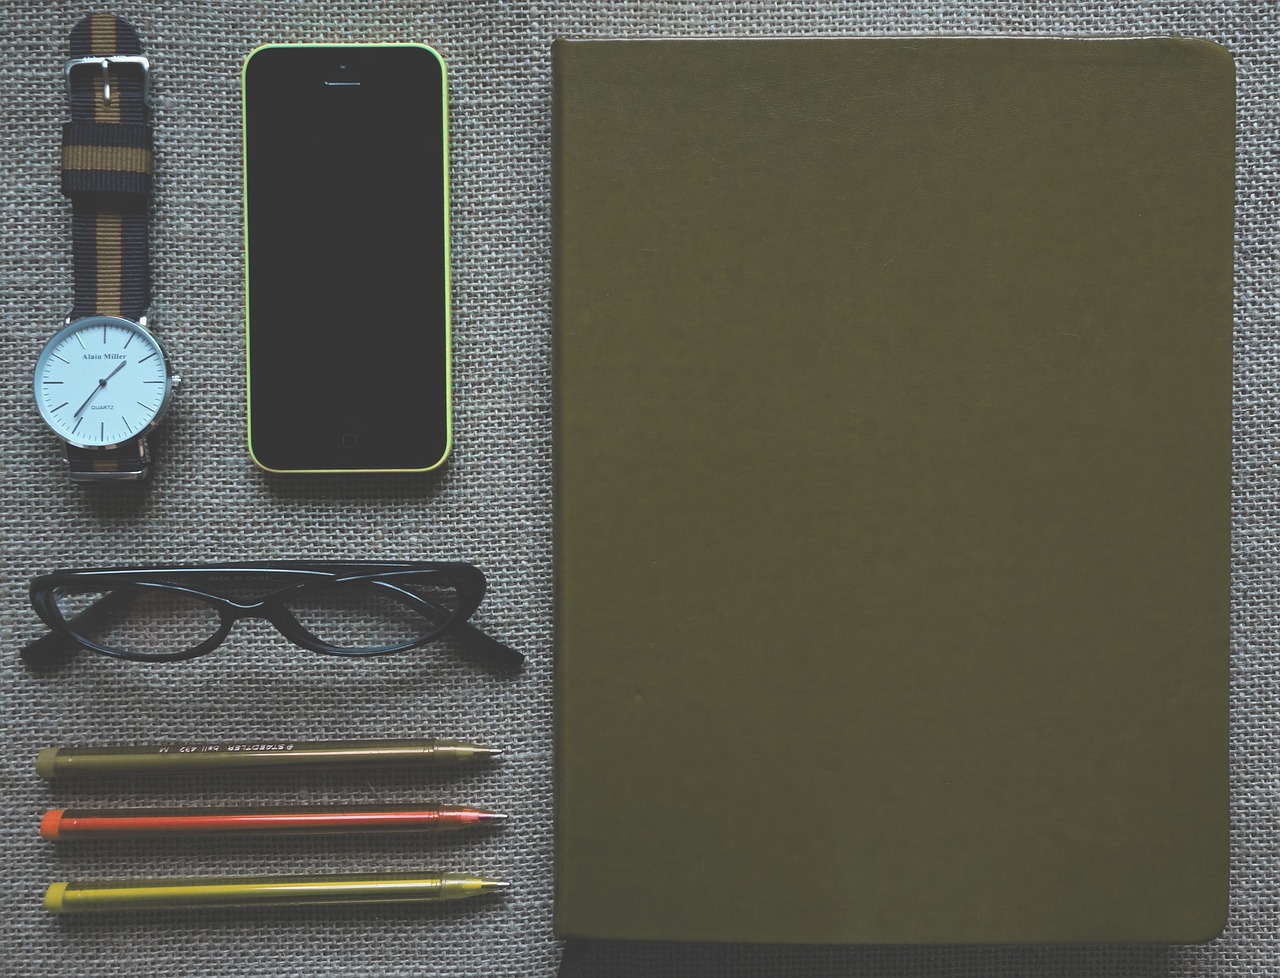 a cell phone sitting on top of a table next to a pair of glasses, a picture, by Andrei Kolkoutine, pexels, minimalism, notebook, green and brown clothes, tools, green and black color scheme